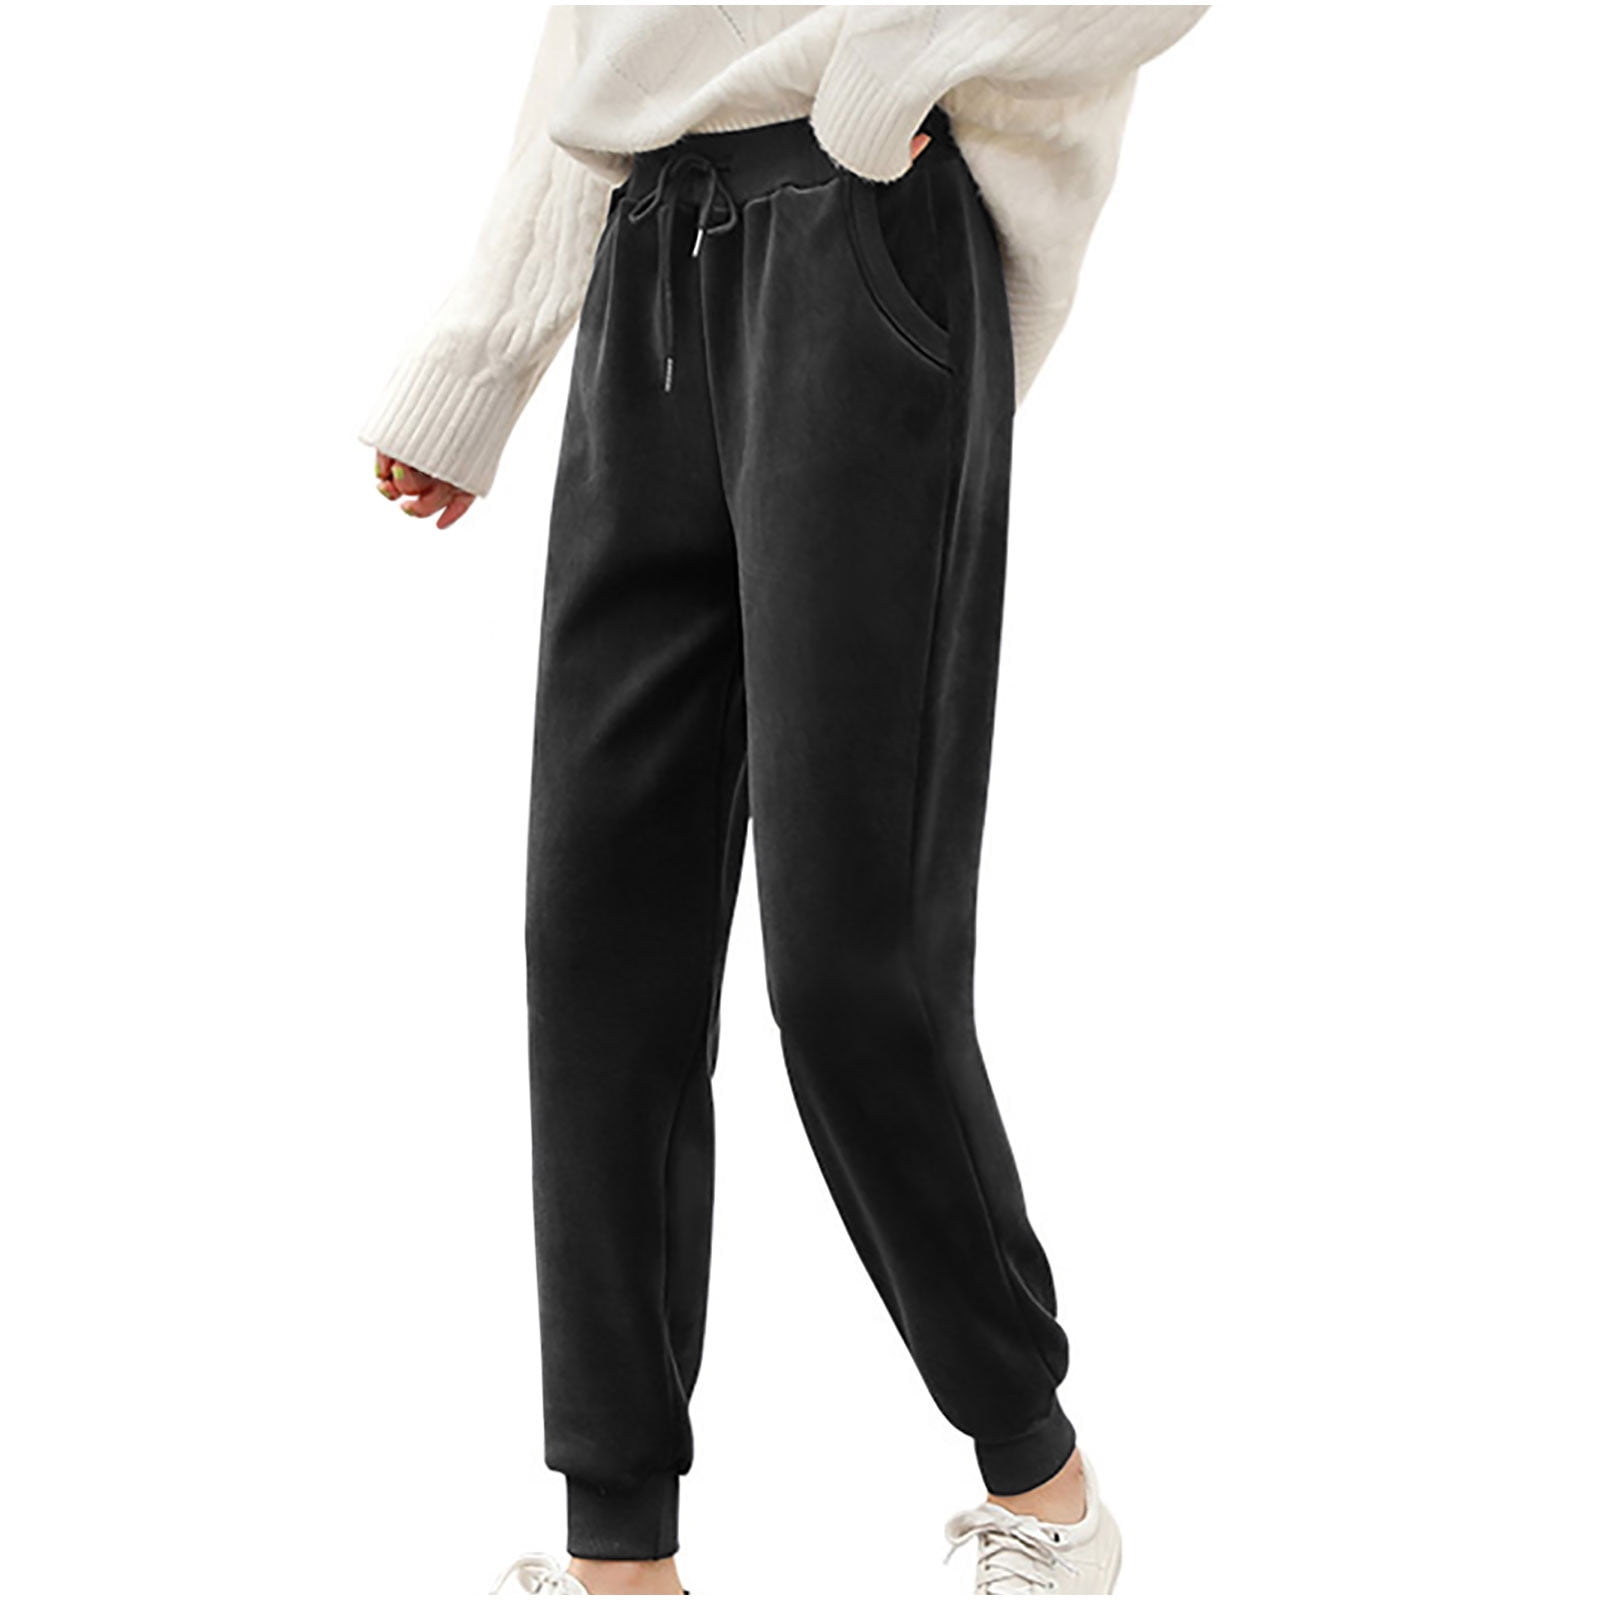 Lined Wool Pants Women's Autumn Winter Plush Thickened Double-Sided Gold Velvet Large Thermal Casual Sweatpants Fleece Lined Leggings 0 - Walmart.com